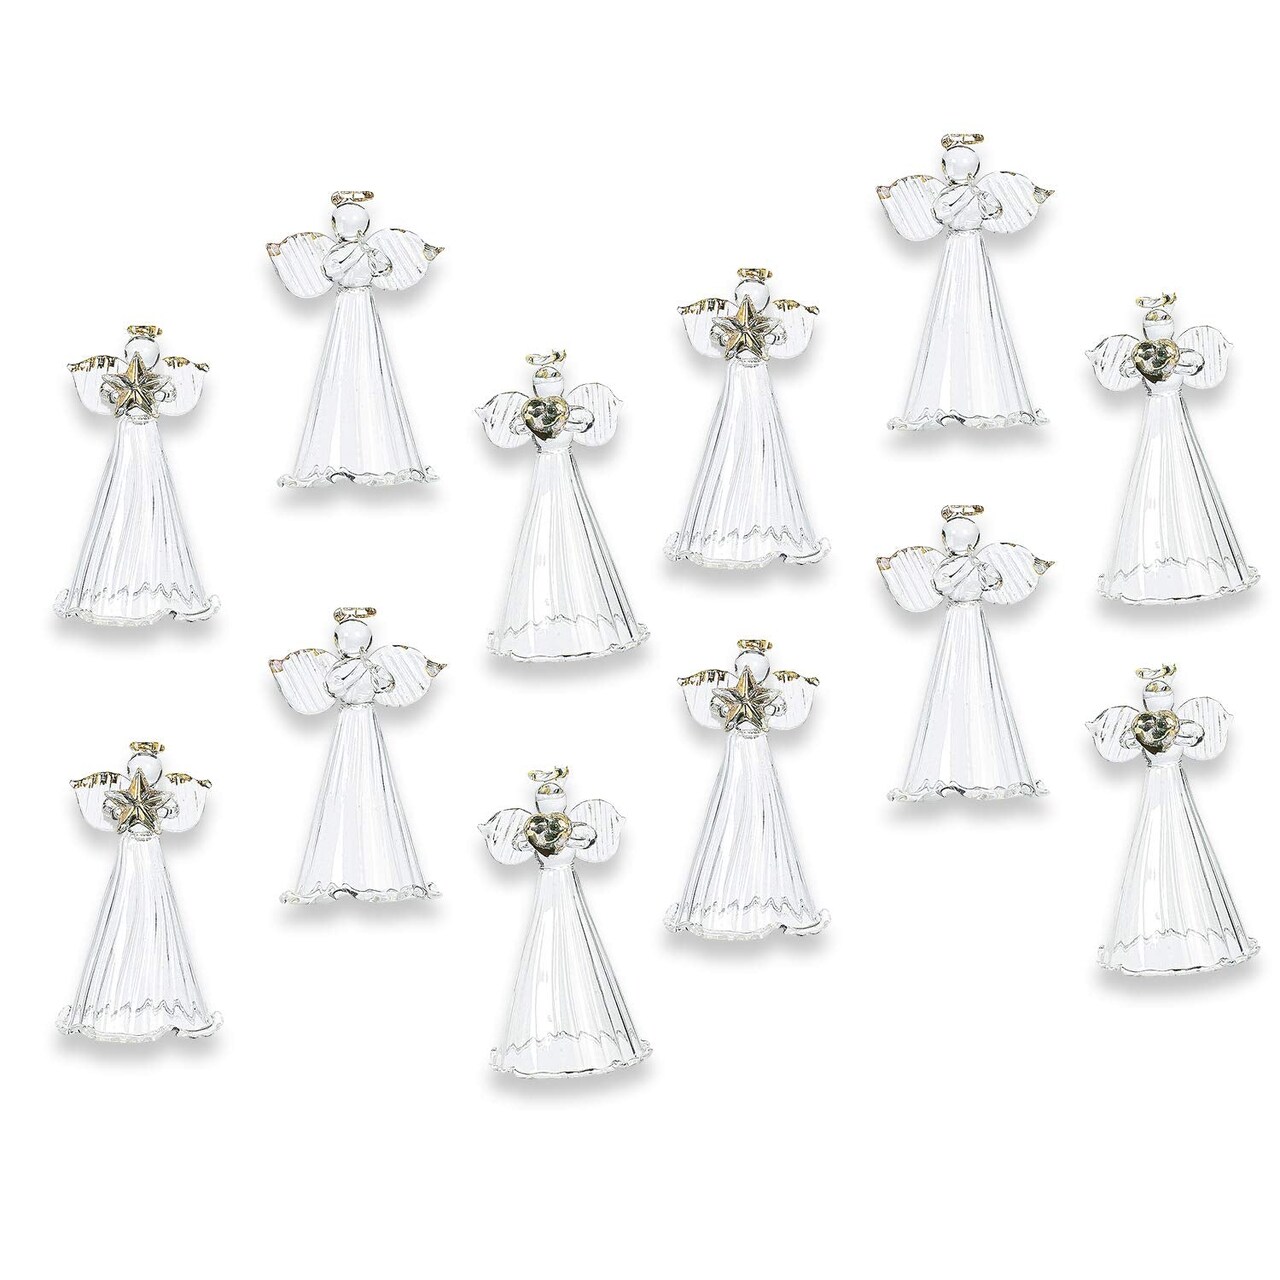 Fun Express Spun Glass Angel Ornaments with Star/Heart/Praying Hands (Set of 12) Christmas Religious Decor